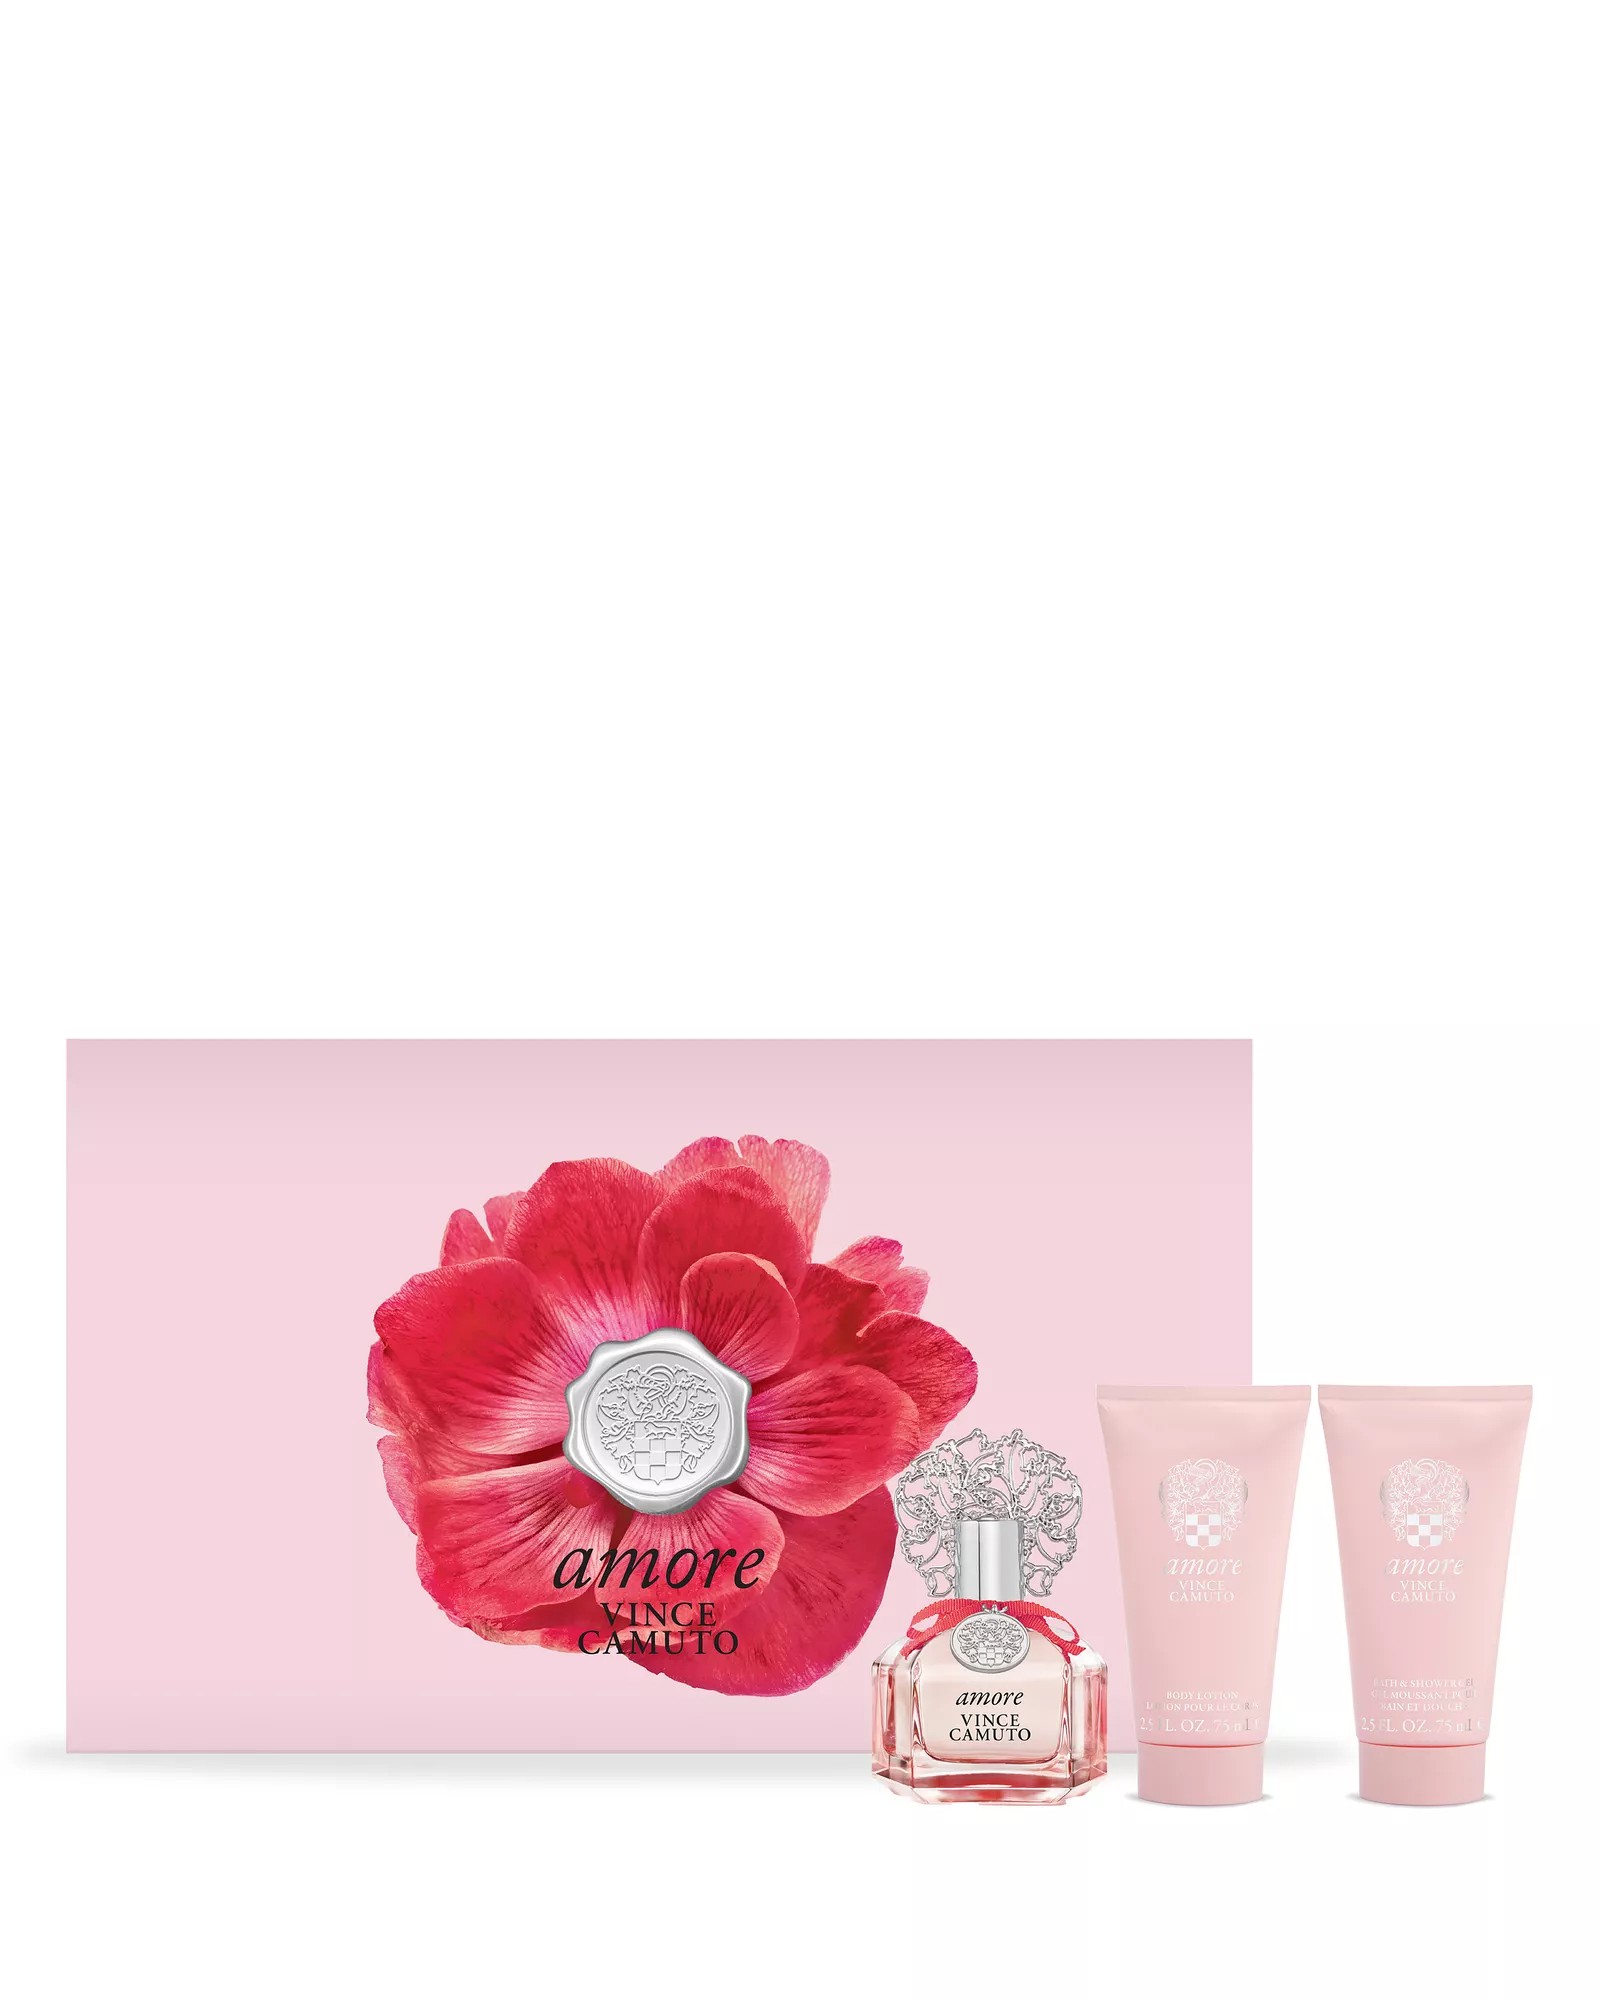 Vince Camuto Amore Vince Camuto Travel Gift Set